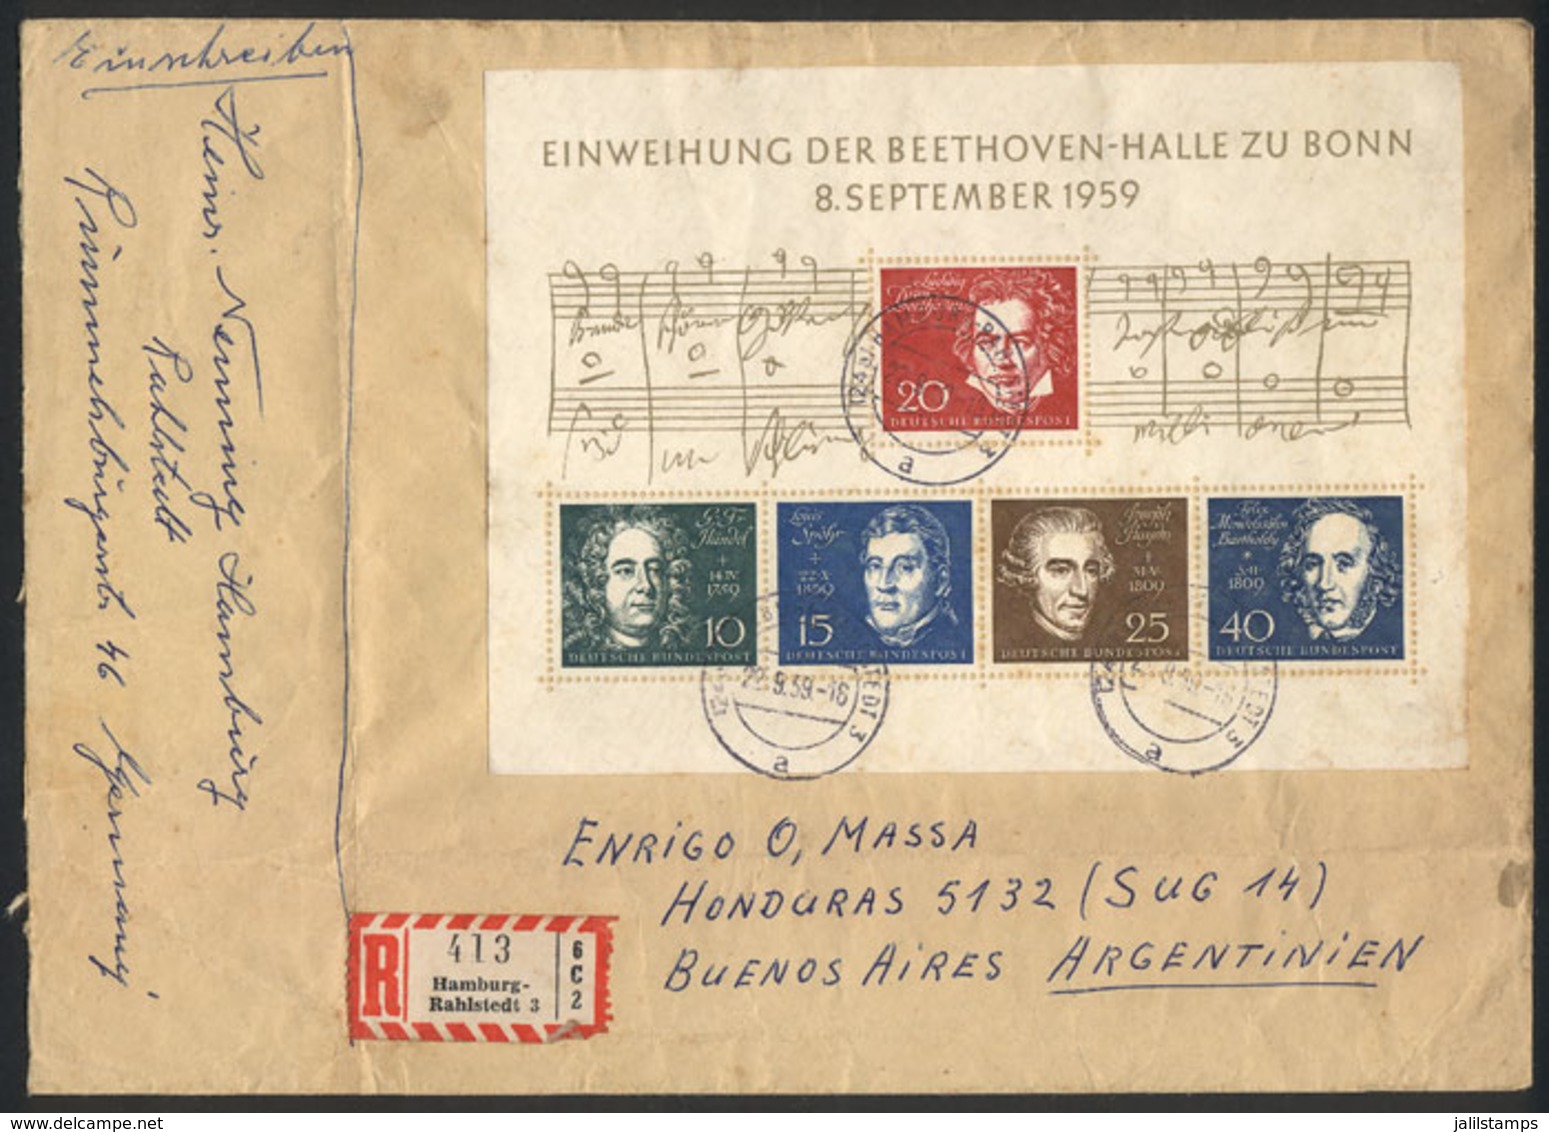 WEST GERMANY: Registered Cover Sent From Hamburg To Buenos Aires On 22/SE/1959, Franked With Souvenir Sheet Michel 2 (Be - Covers & Documents